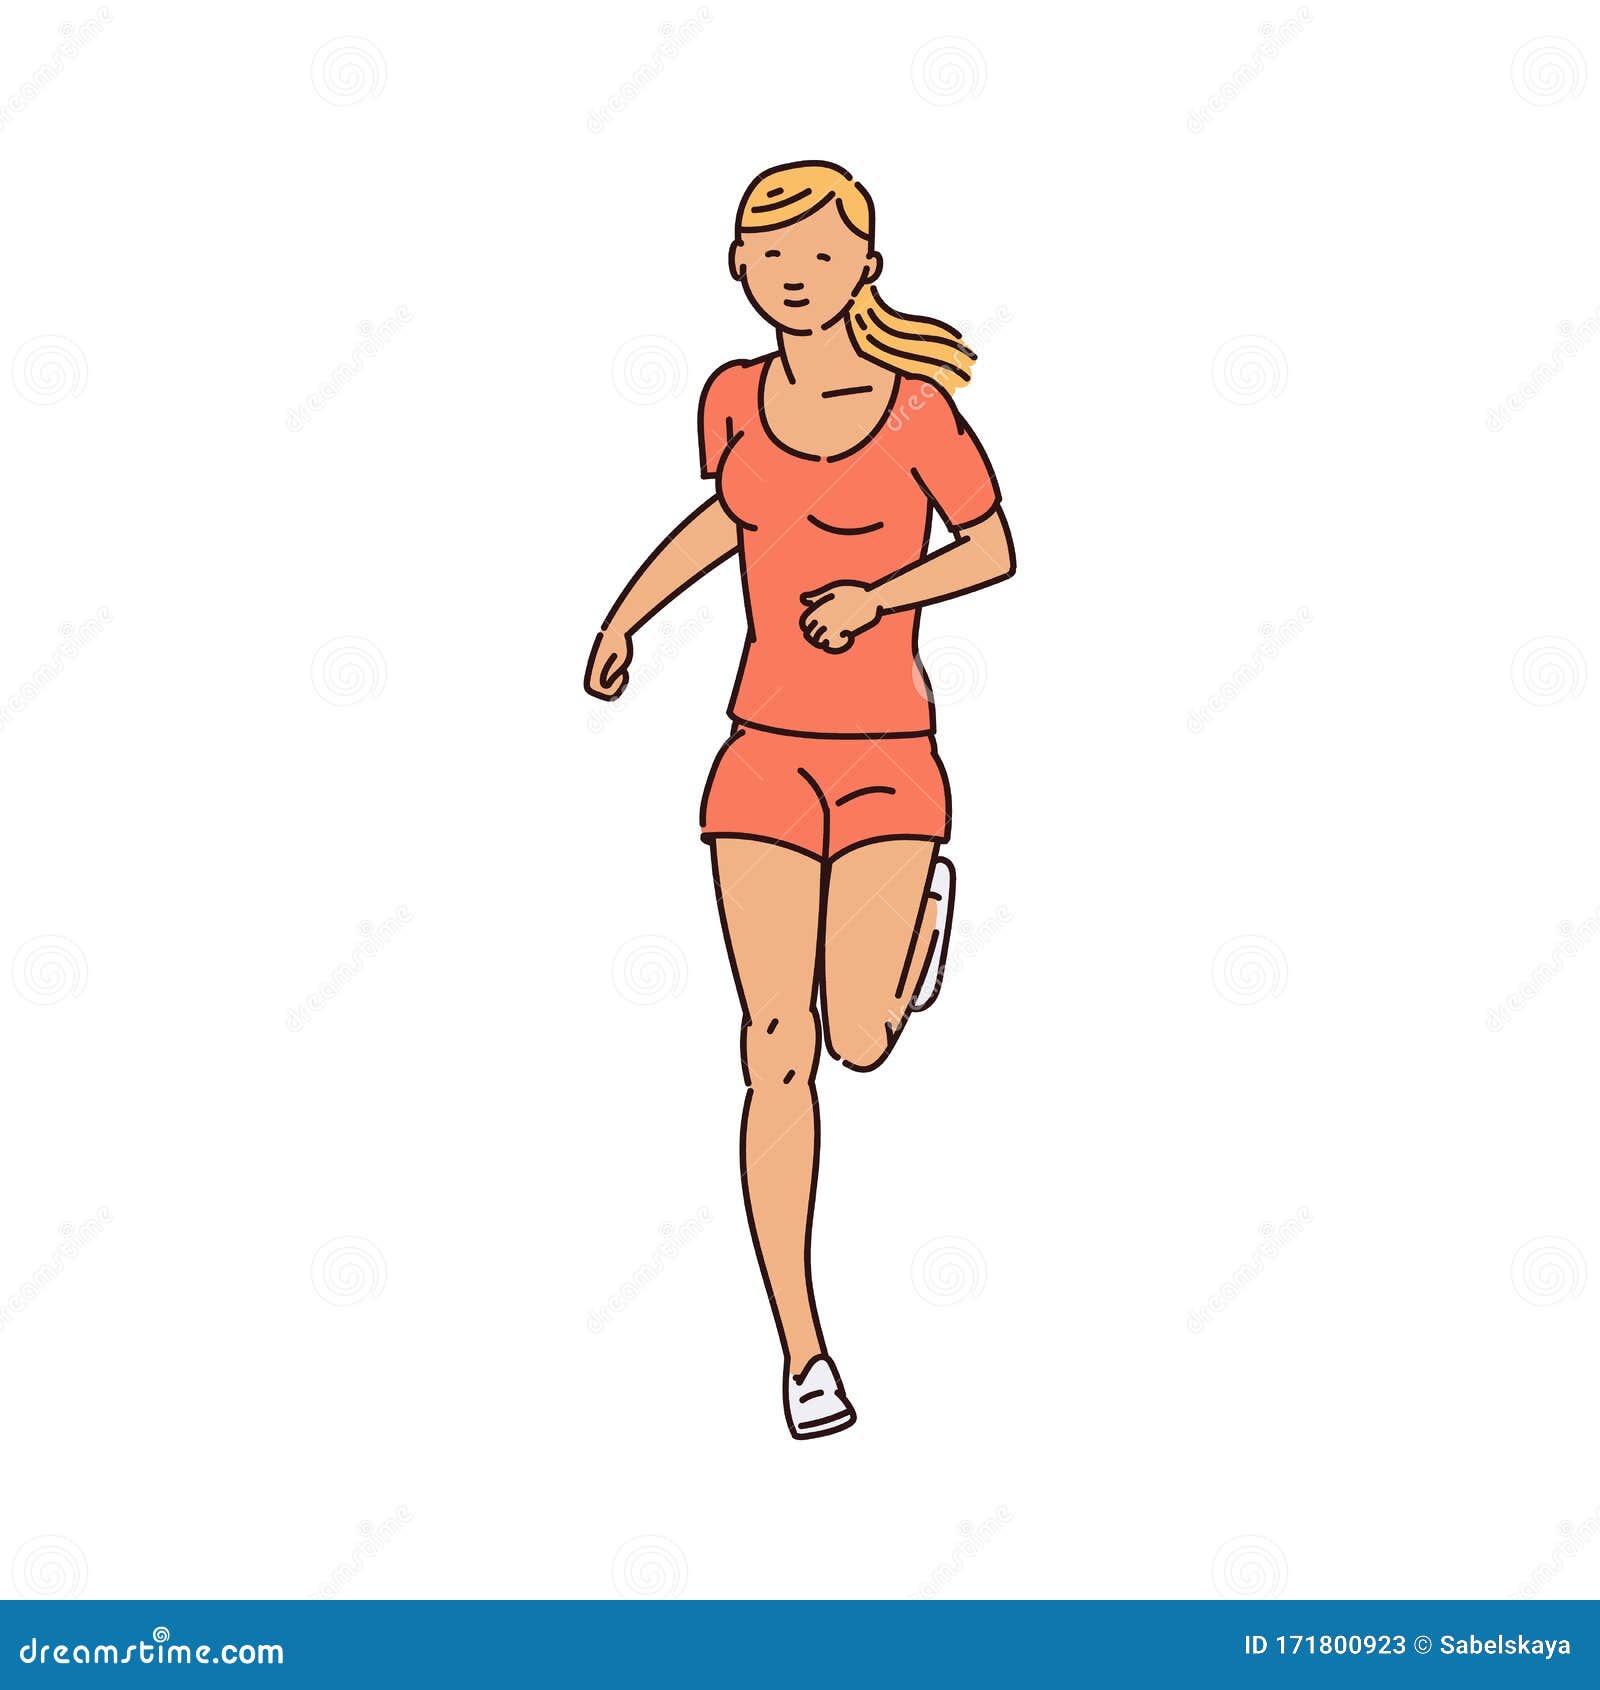 Cartoon Woman Running Forward Seen from Front View Stock Vector -  Illustration of forward, speed: 171800923